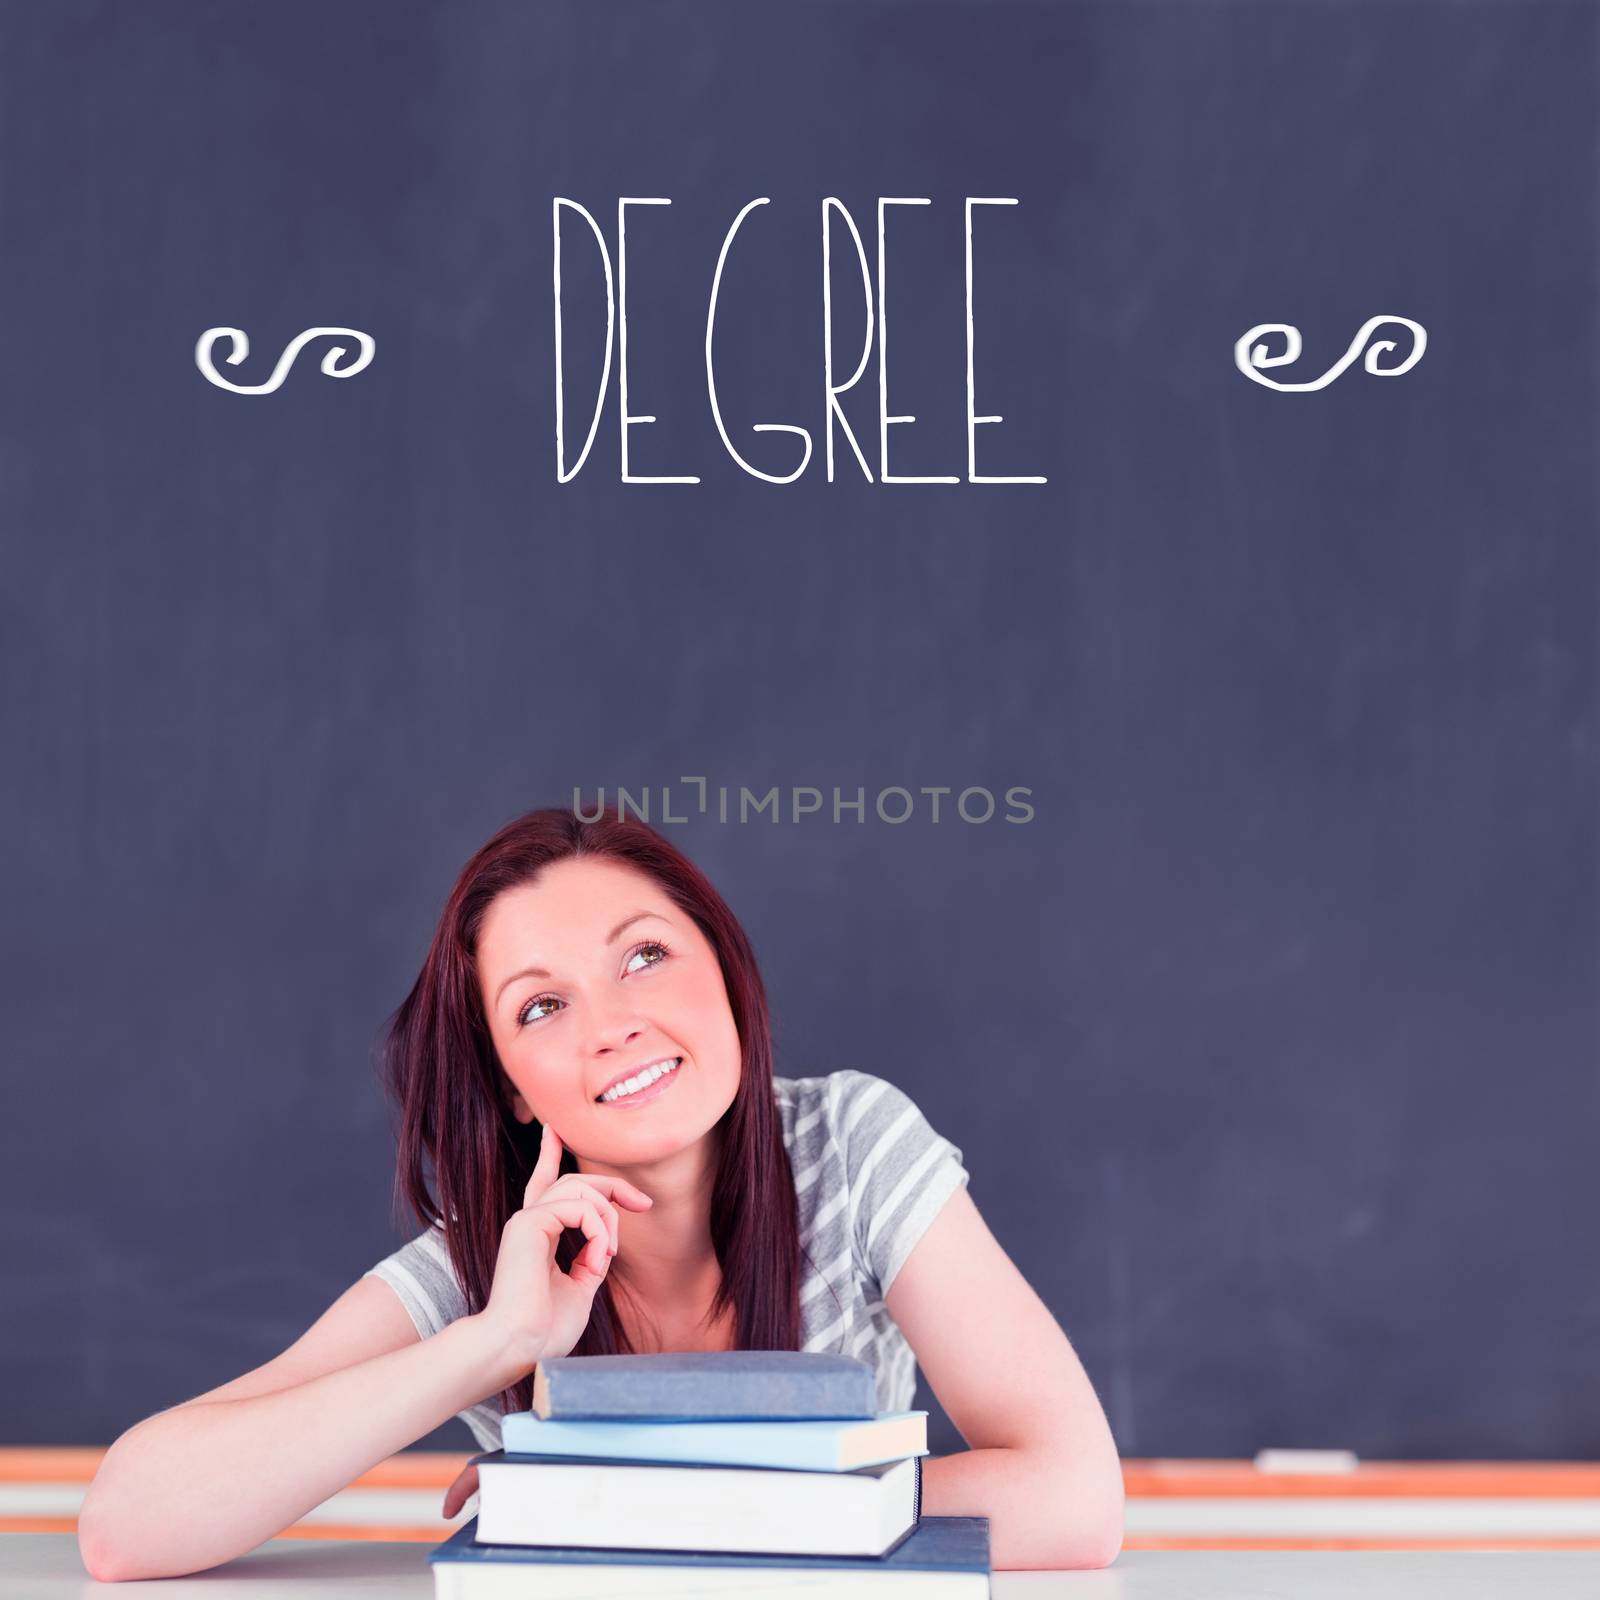 Degree against student thinking in classroom by Wavebreakmedia